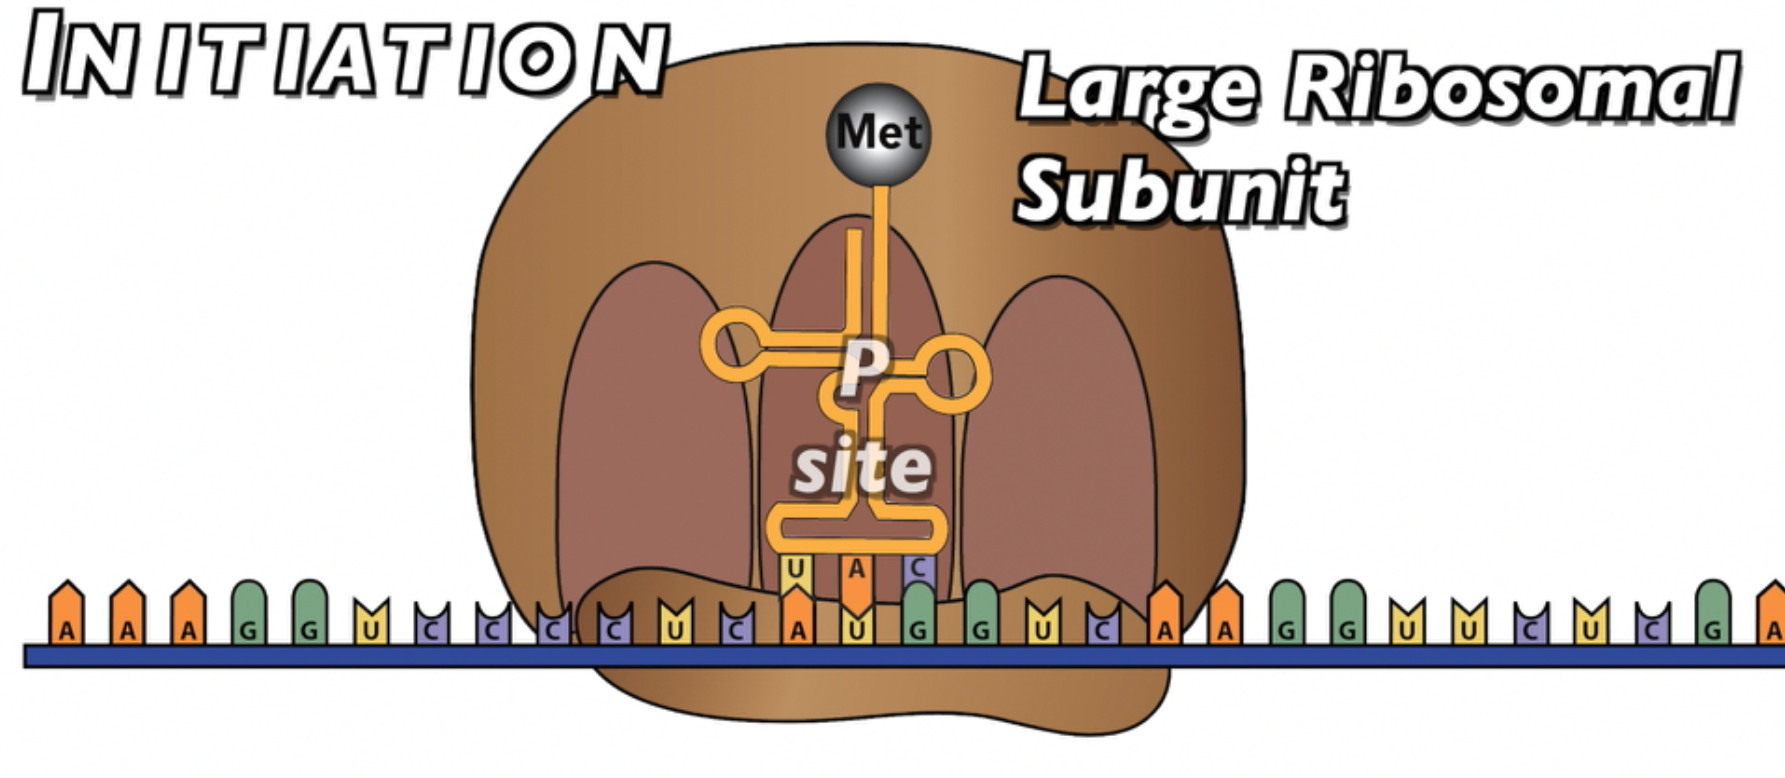 The large ribosomal subunit binds with the small subunit such that the Met-carrying tRNA is seccure in the P site.